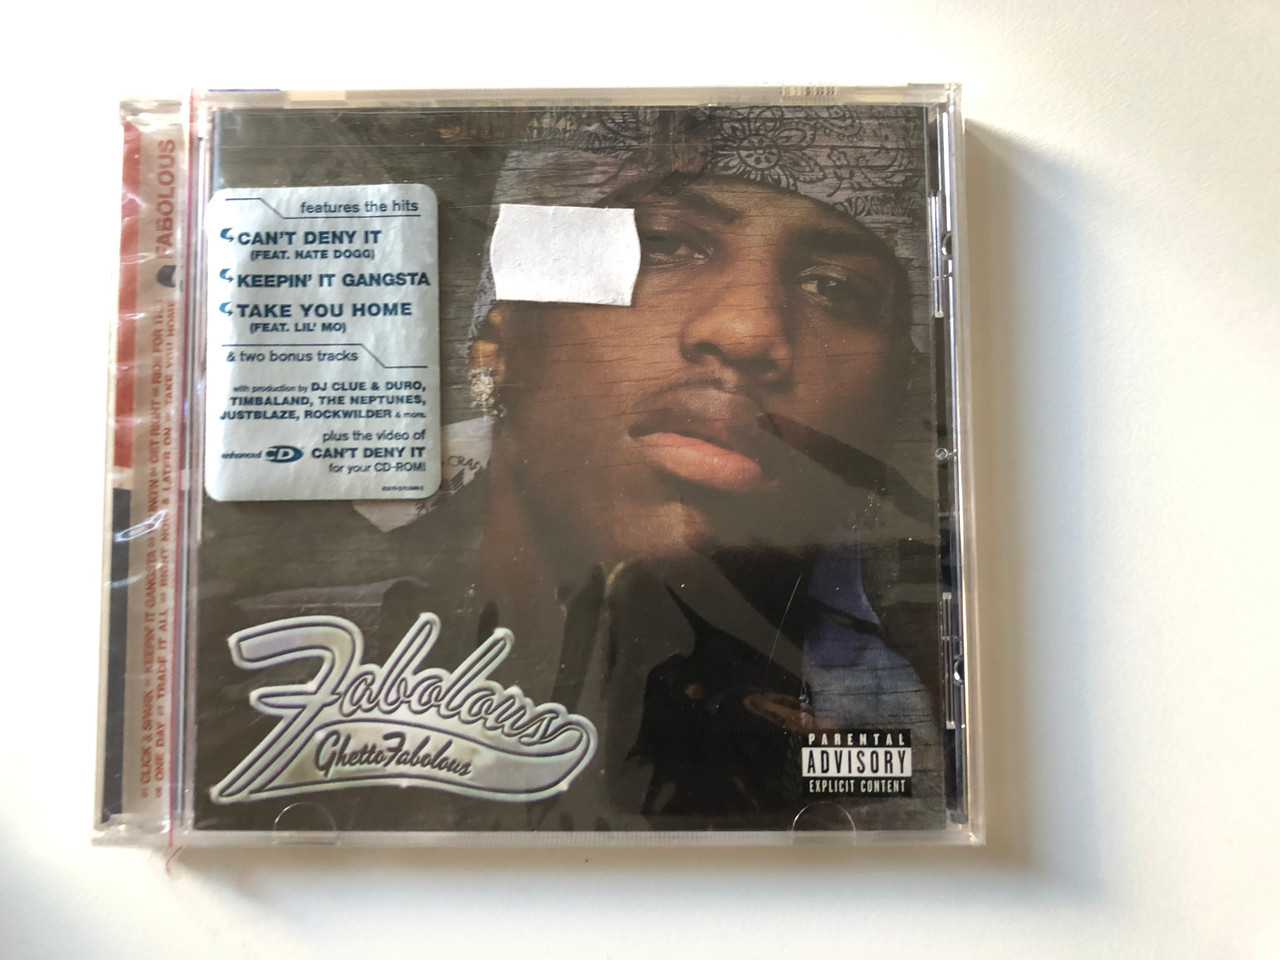 Fabolous – Ghetto Fabolous / Features the hits: 'Can't Deny It' (Feat. Nate  Dogg), 'Keepin' It Gangsta', Take You Home' (Feat. Lil' Mo) & two bonus  tracks / Elektra Audio CD 2001 / 62679-2 - bibleinmylanguage